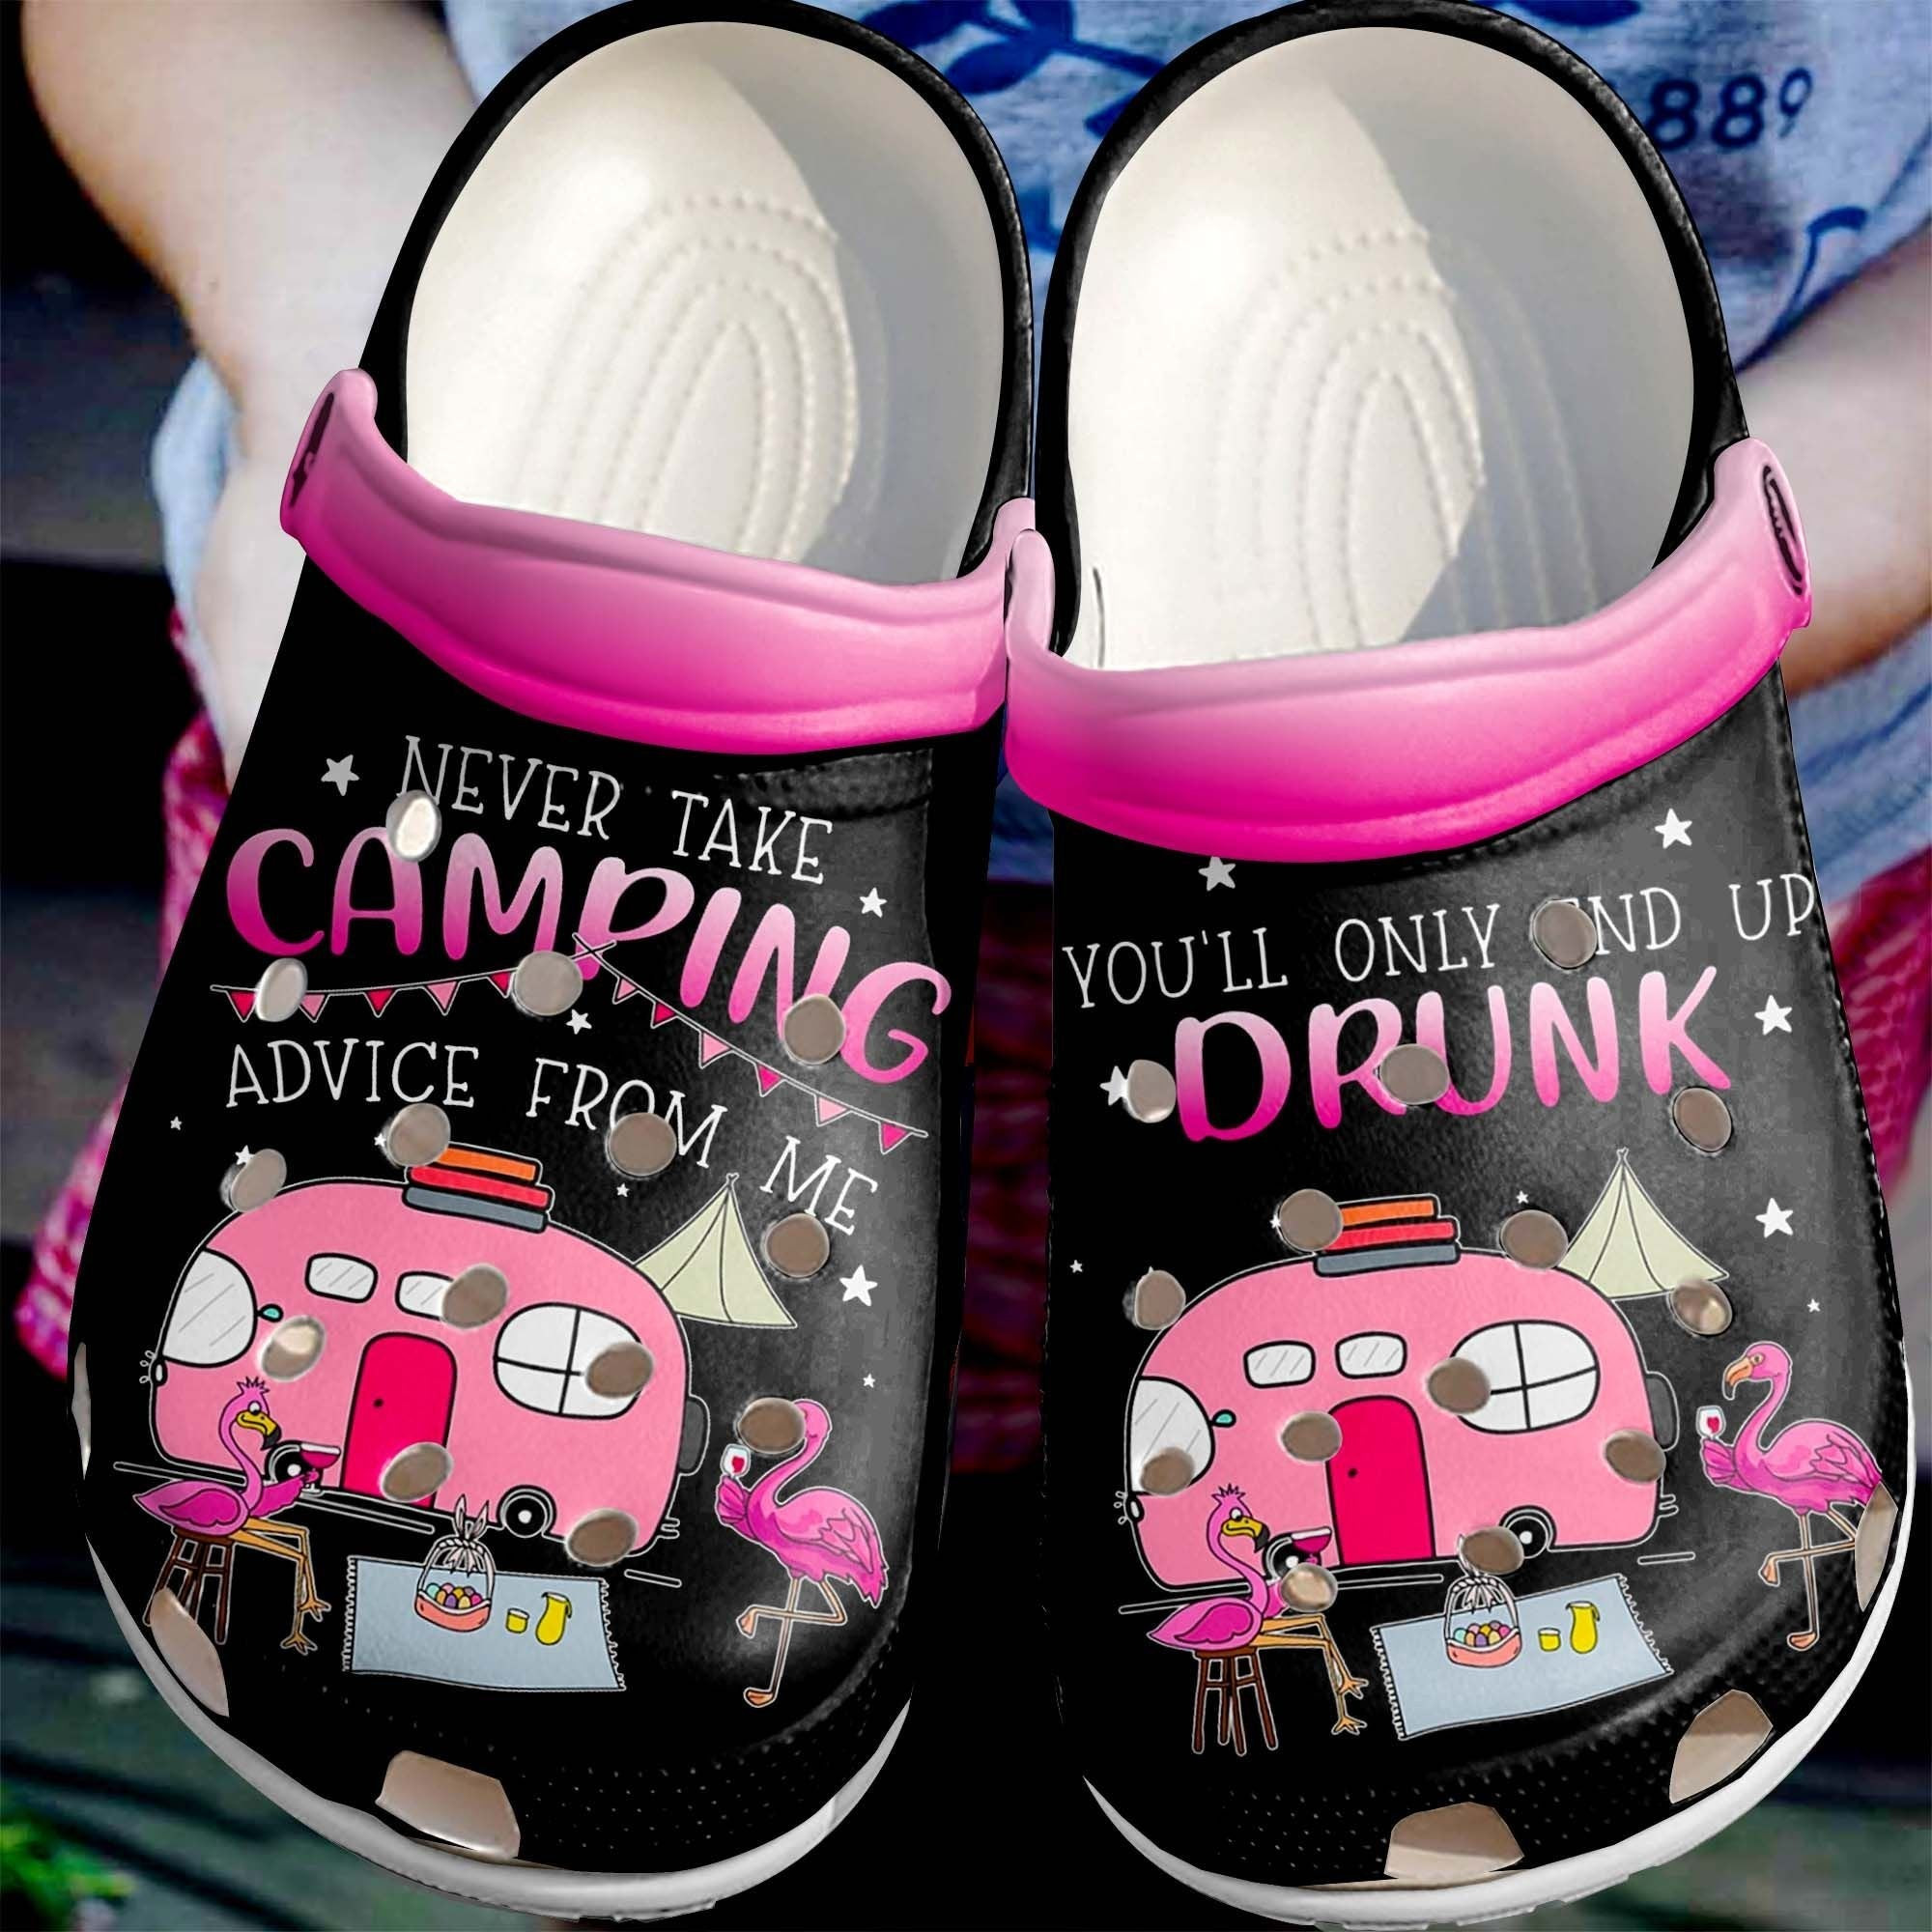 Camping Drunk With Flamingo Shoes - Never Take Camping Advice From Me Crocs Clog